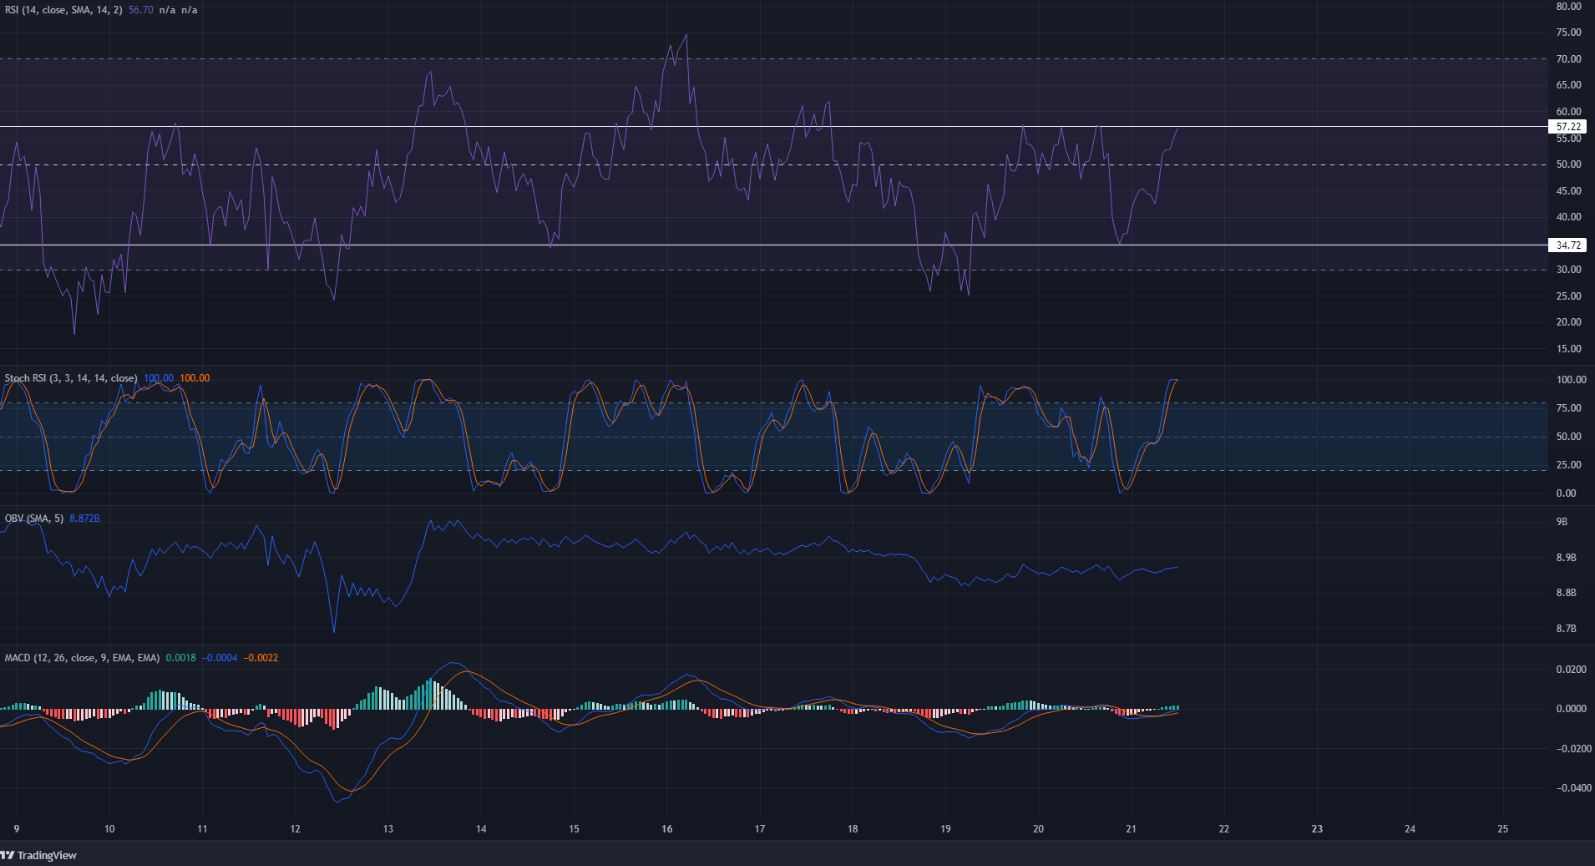 Cardano approaches a short-term resistance zone, but patience remains key